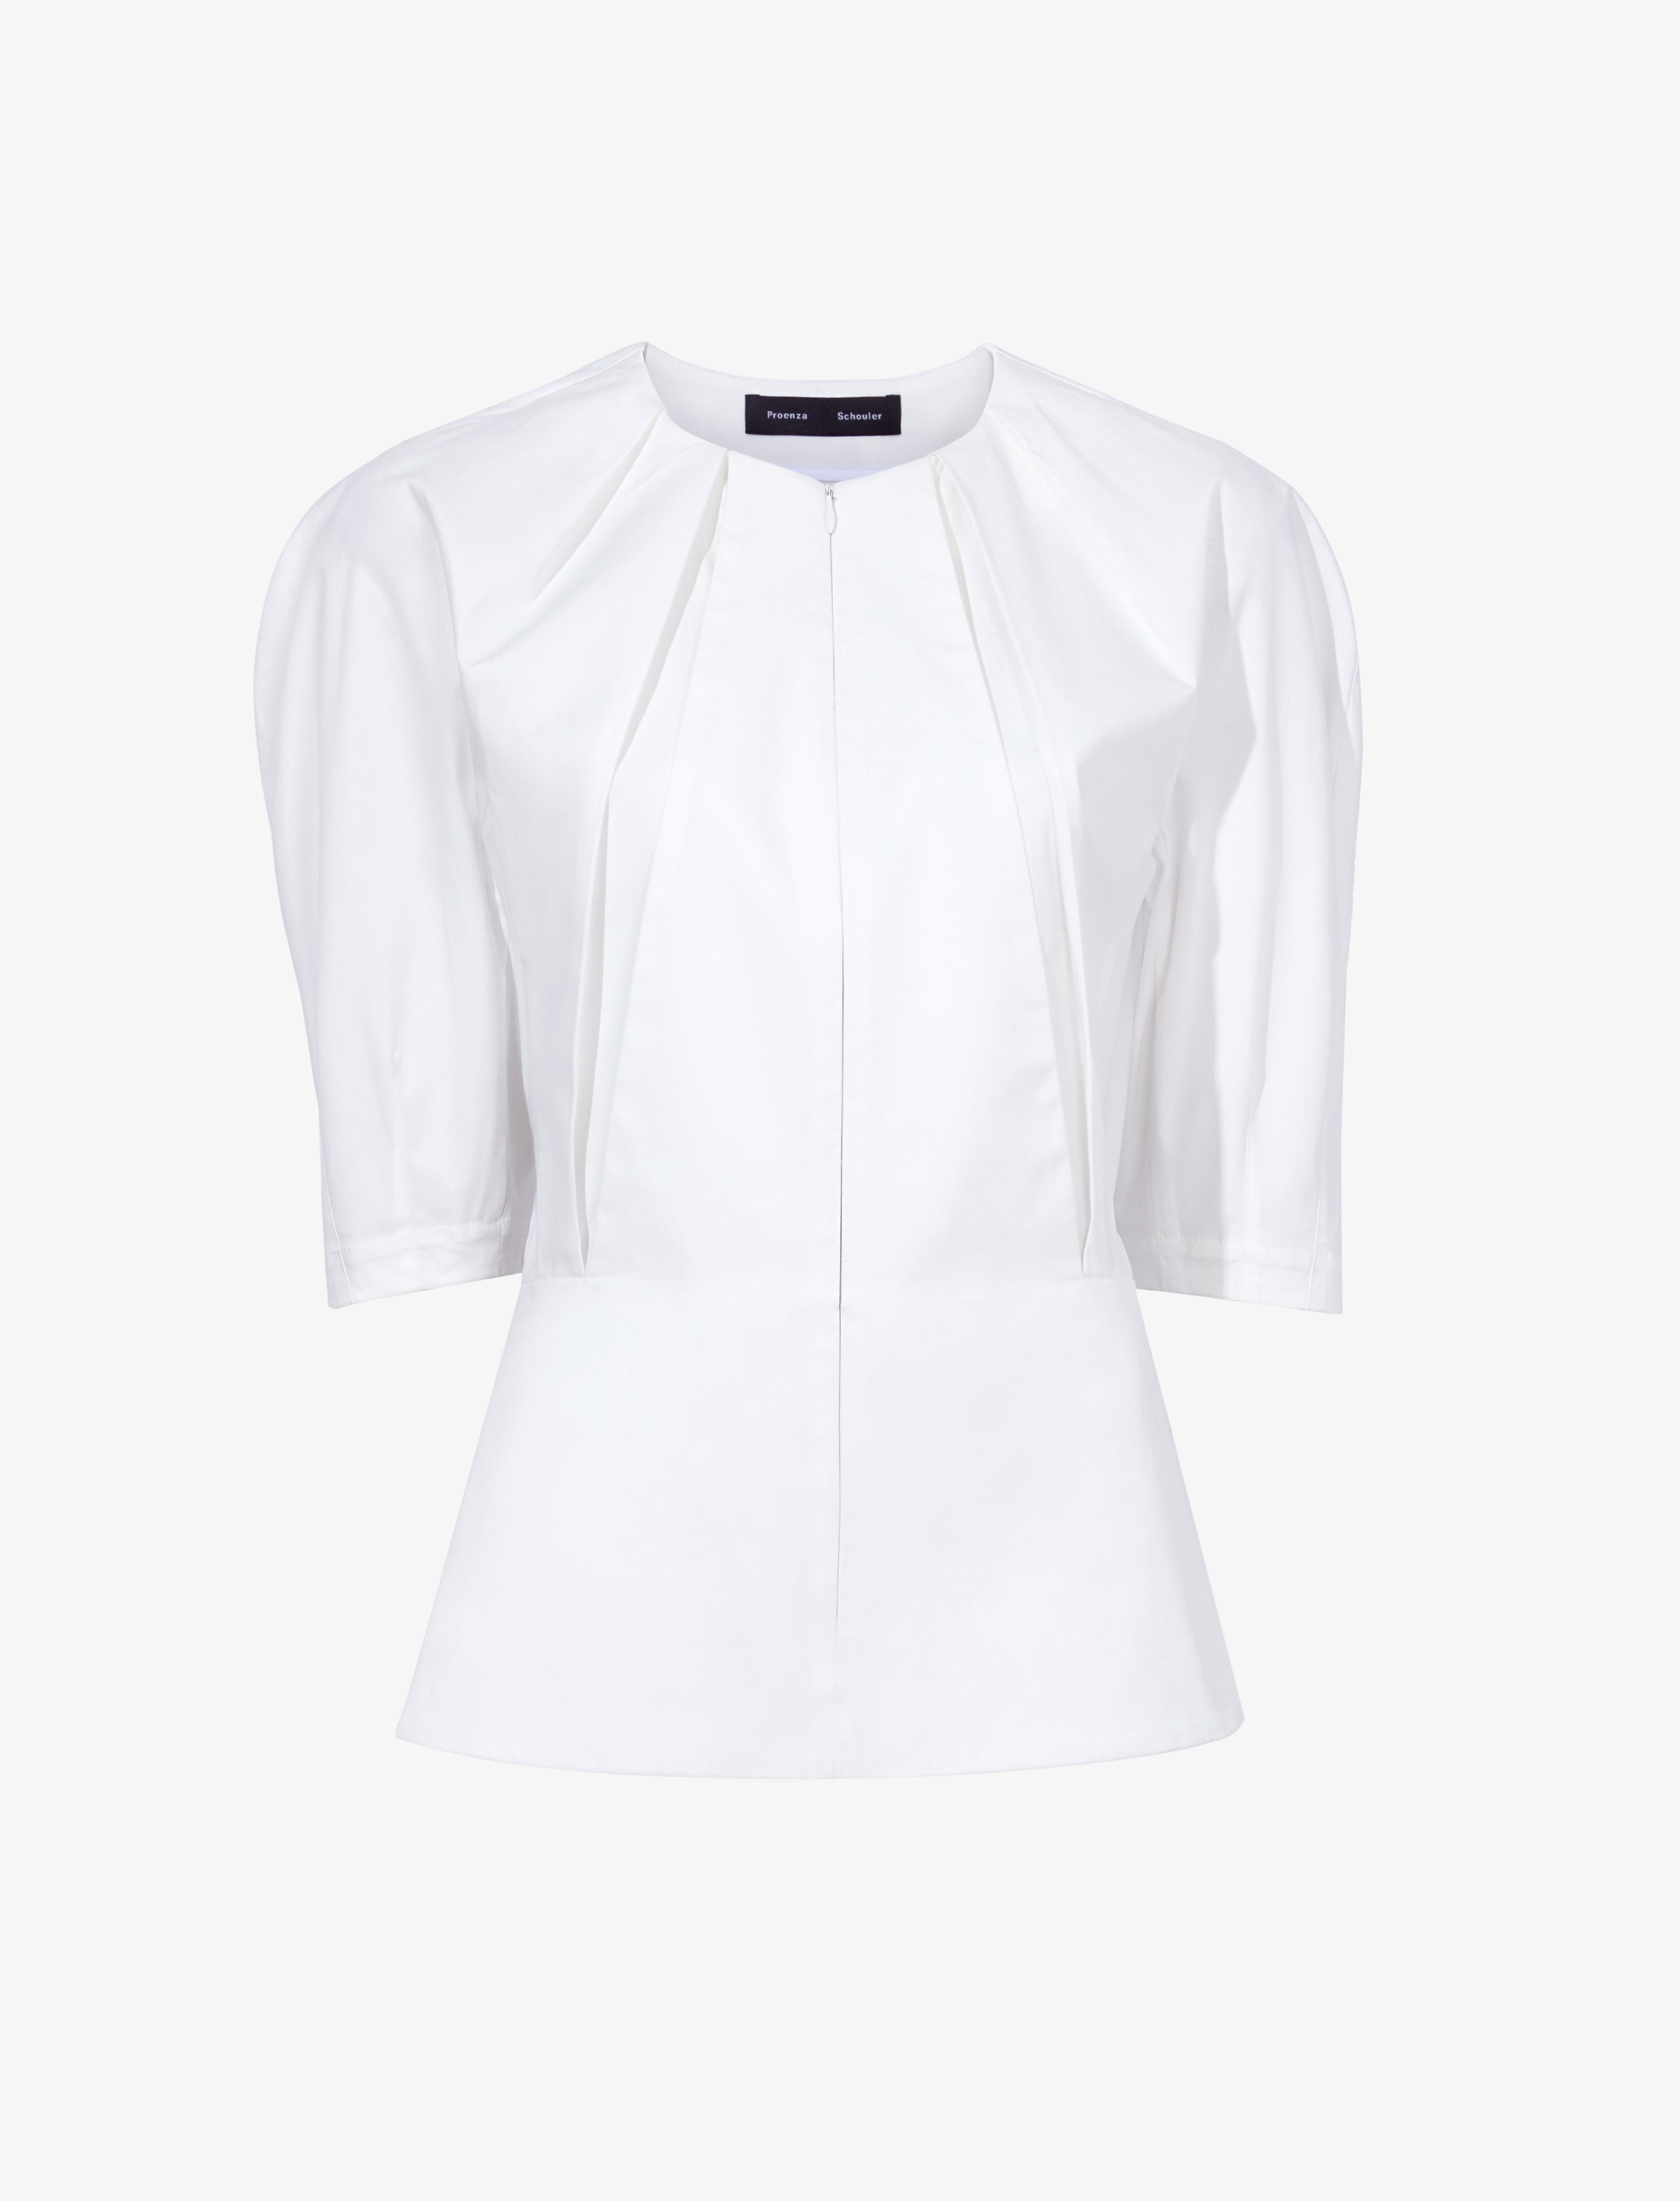 Proenza Schouler shirred-sleeve ruched top - White